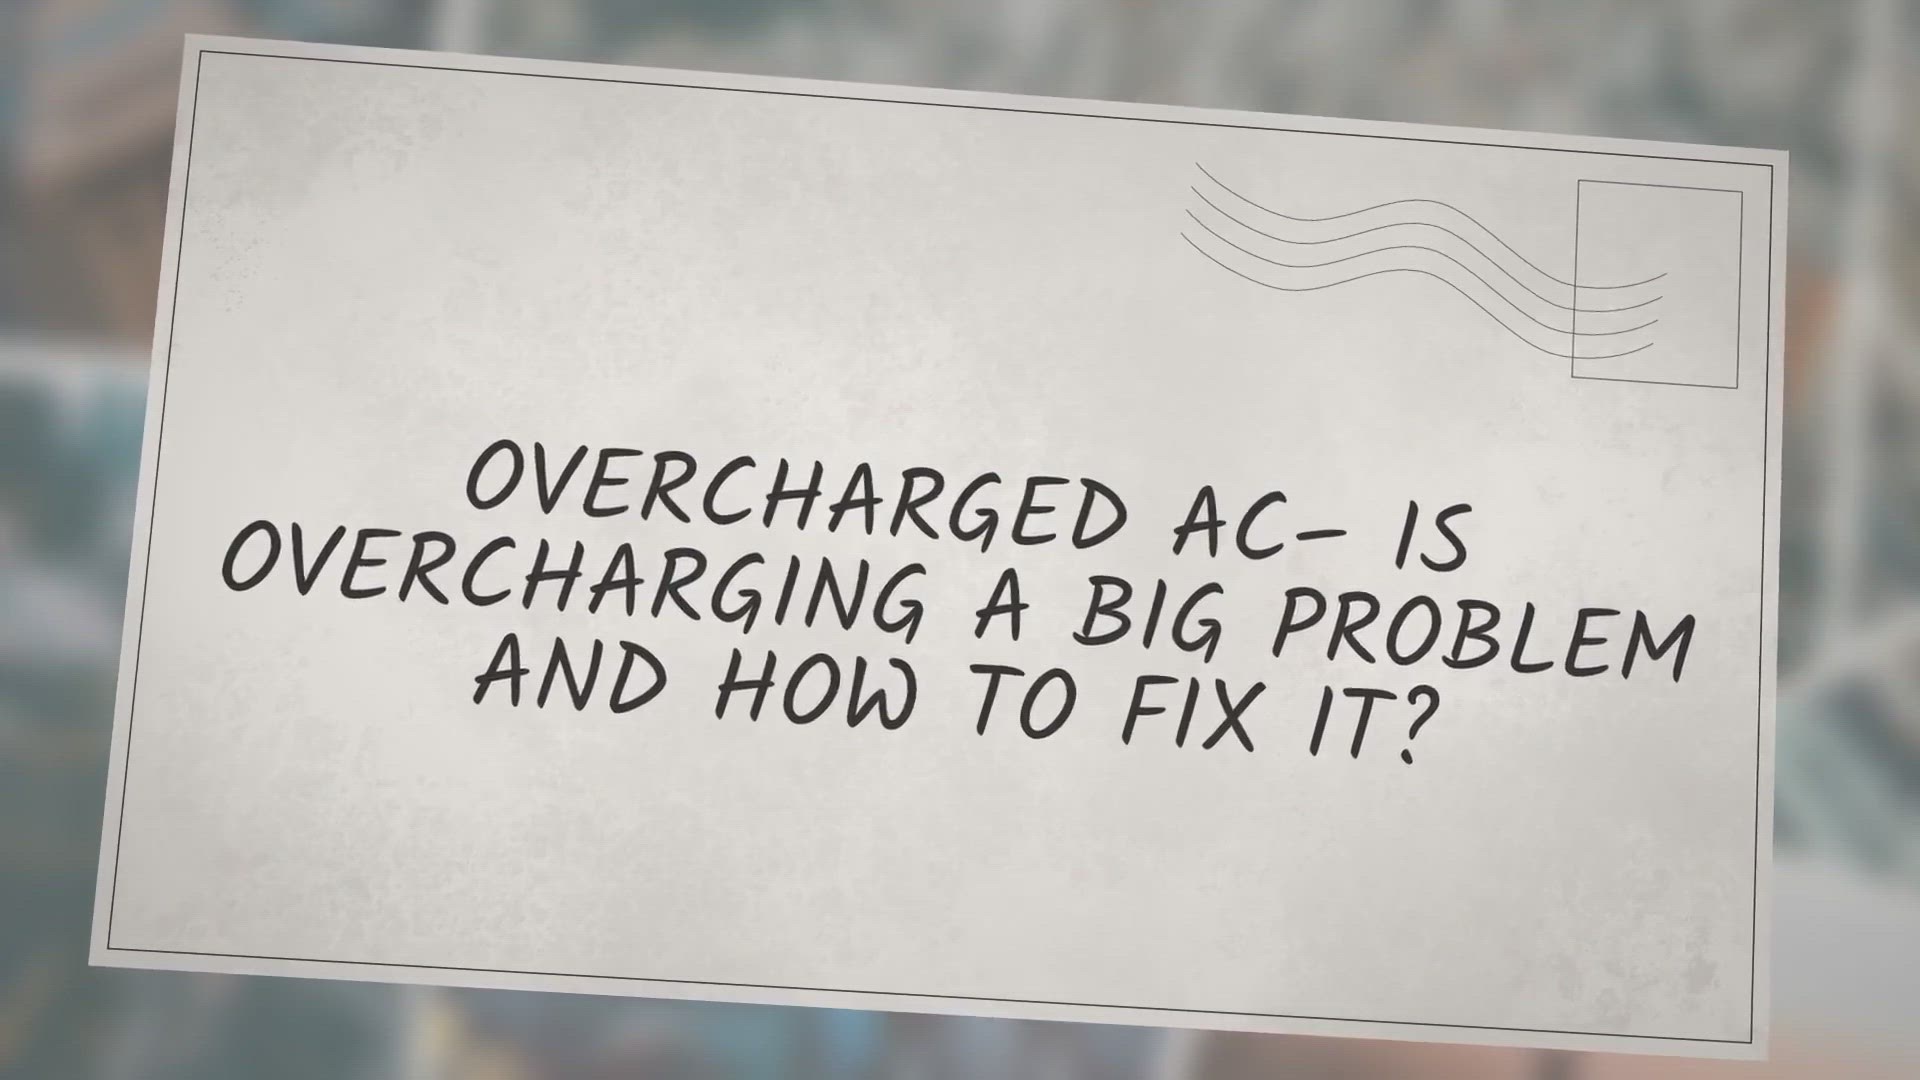 'Video thumbnail for OVERCHARGED AC – IS OVERCHARGING A BIG PROBLEM AND HOW TO FIX IT?'